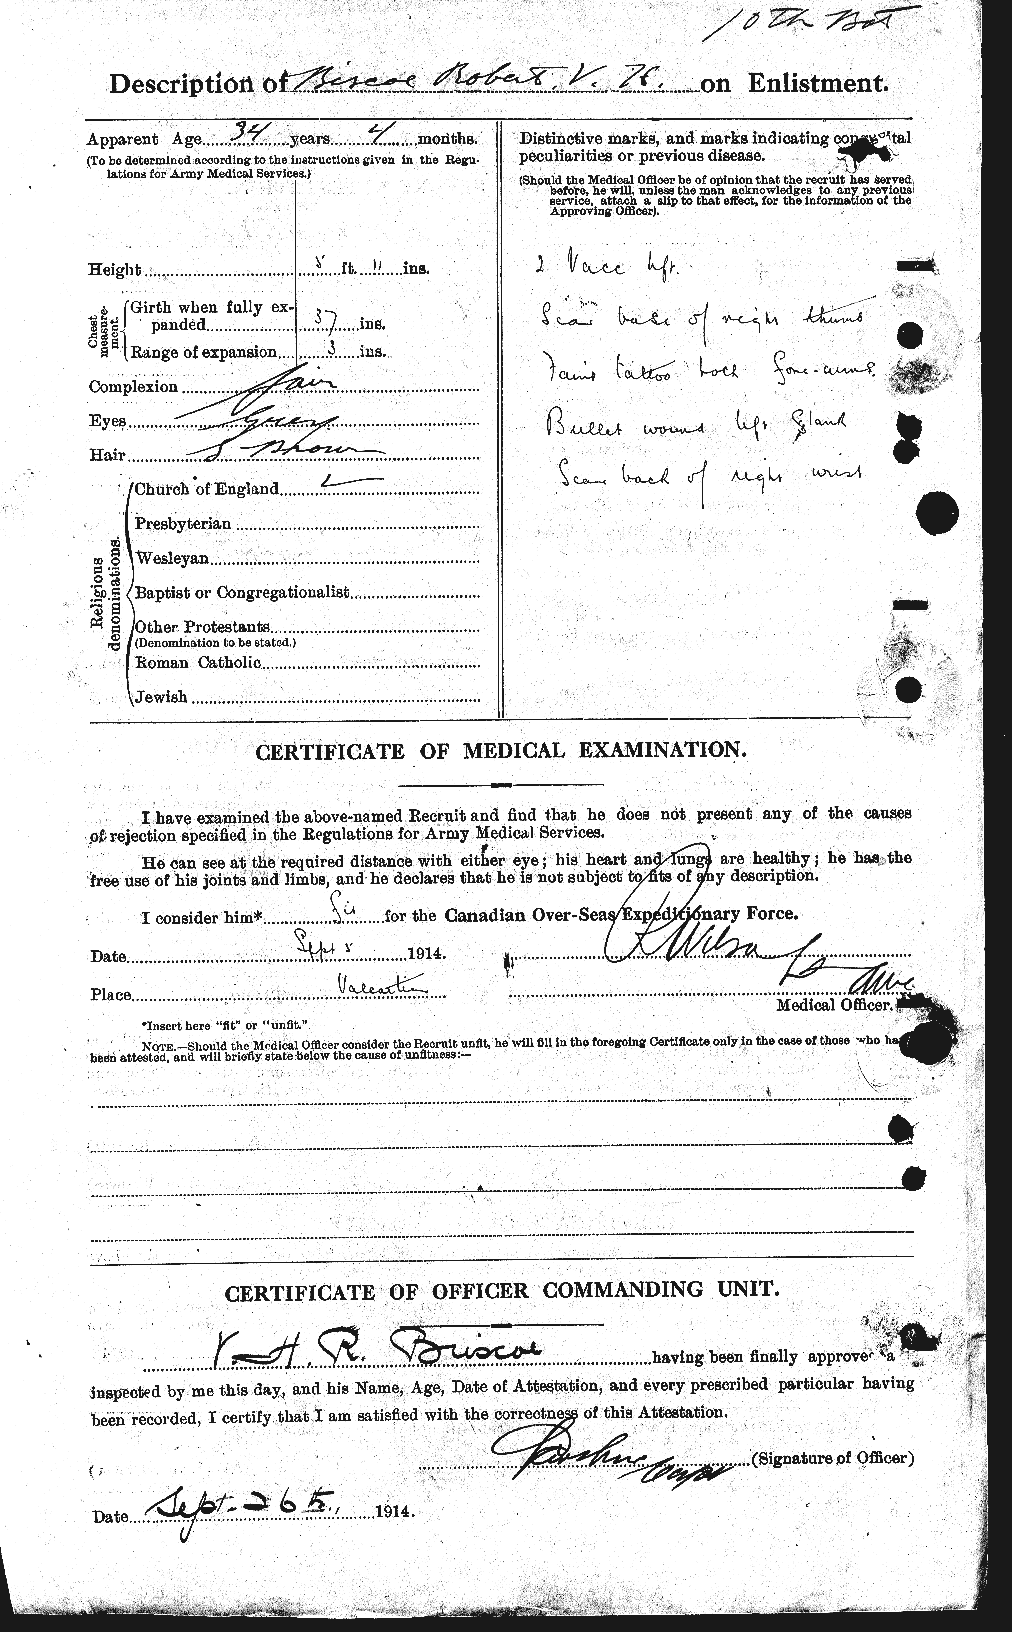 Personnel Records of the First World War - CEF 244132b